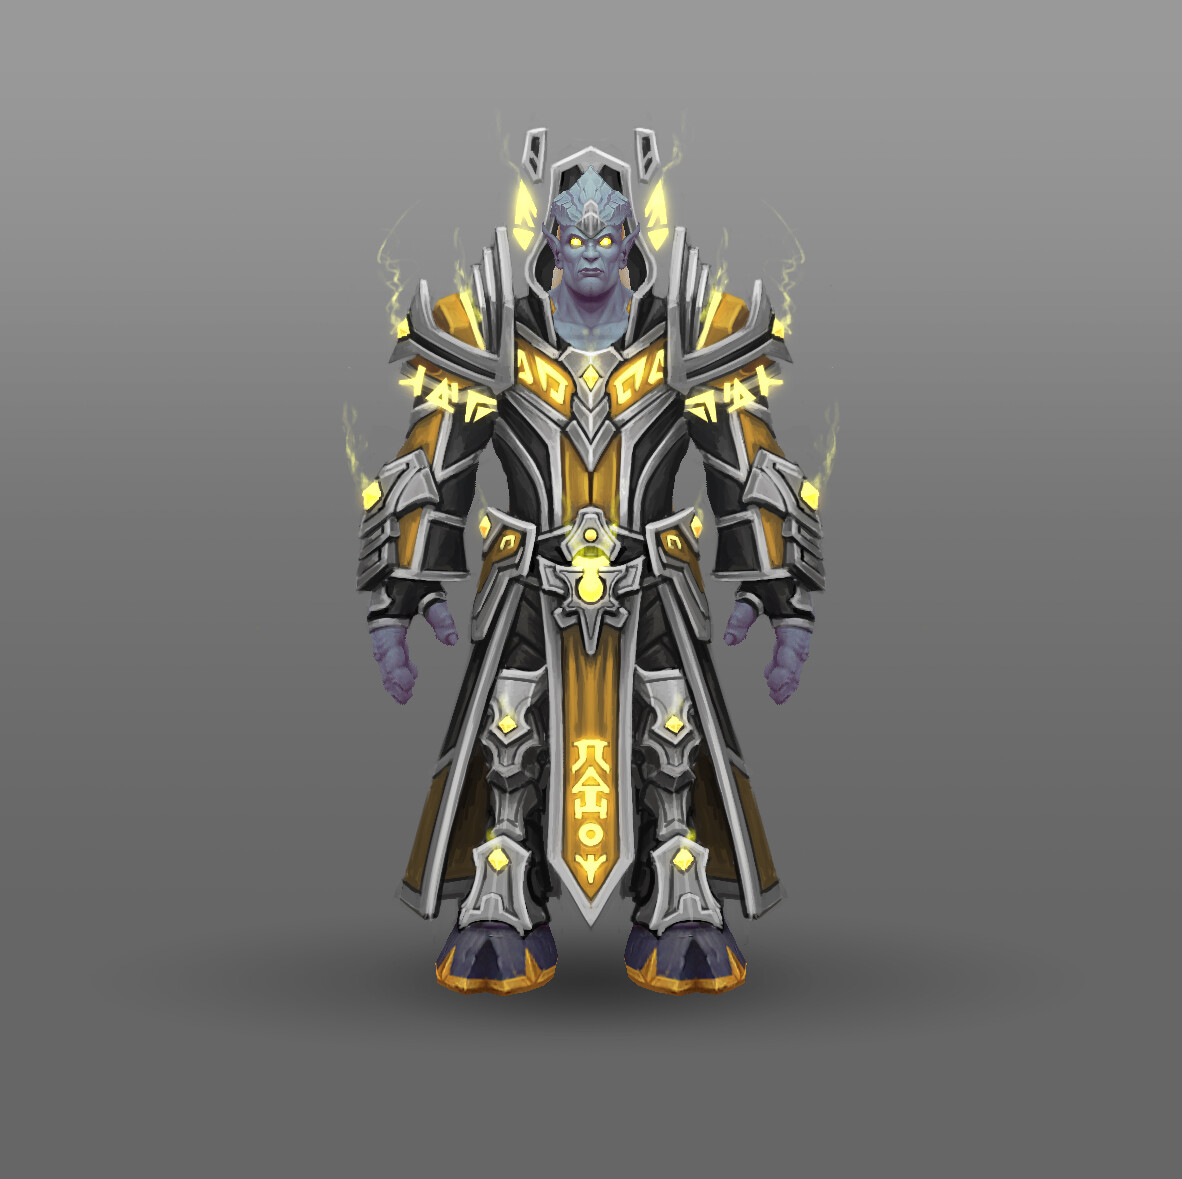 Mage
In the first draft, the colour scheme was very similar to the Priest set. To make it more distinct I decided to use silver as the main colour.